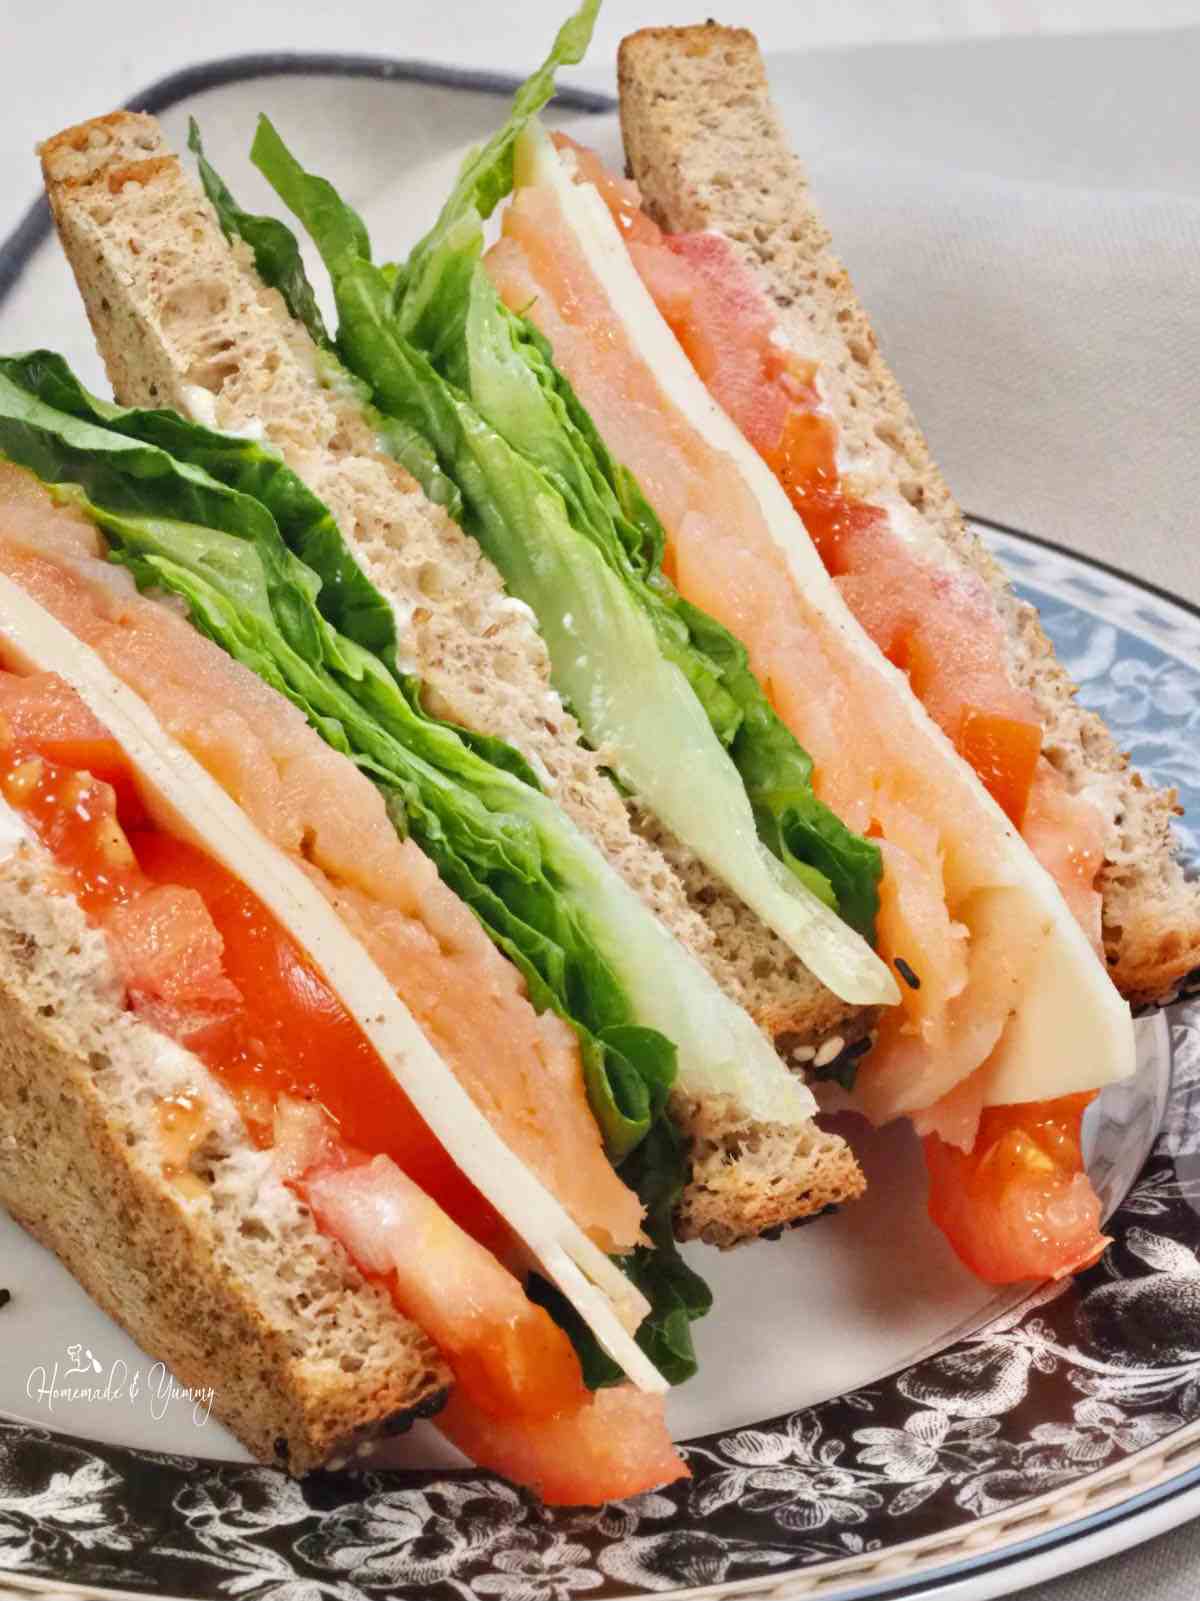 Sandwich with tomatoes, cheese, lettuce and smoked salmon.